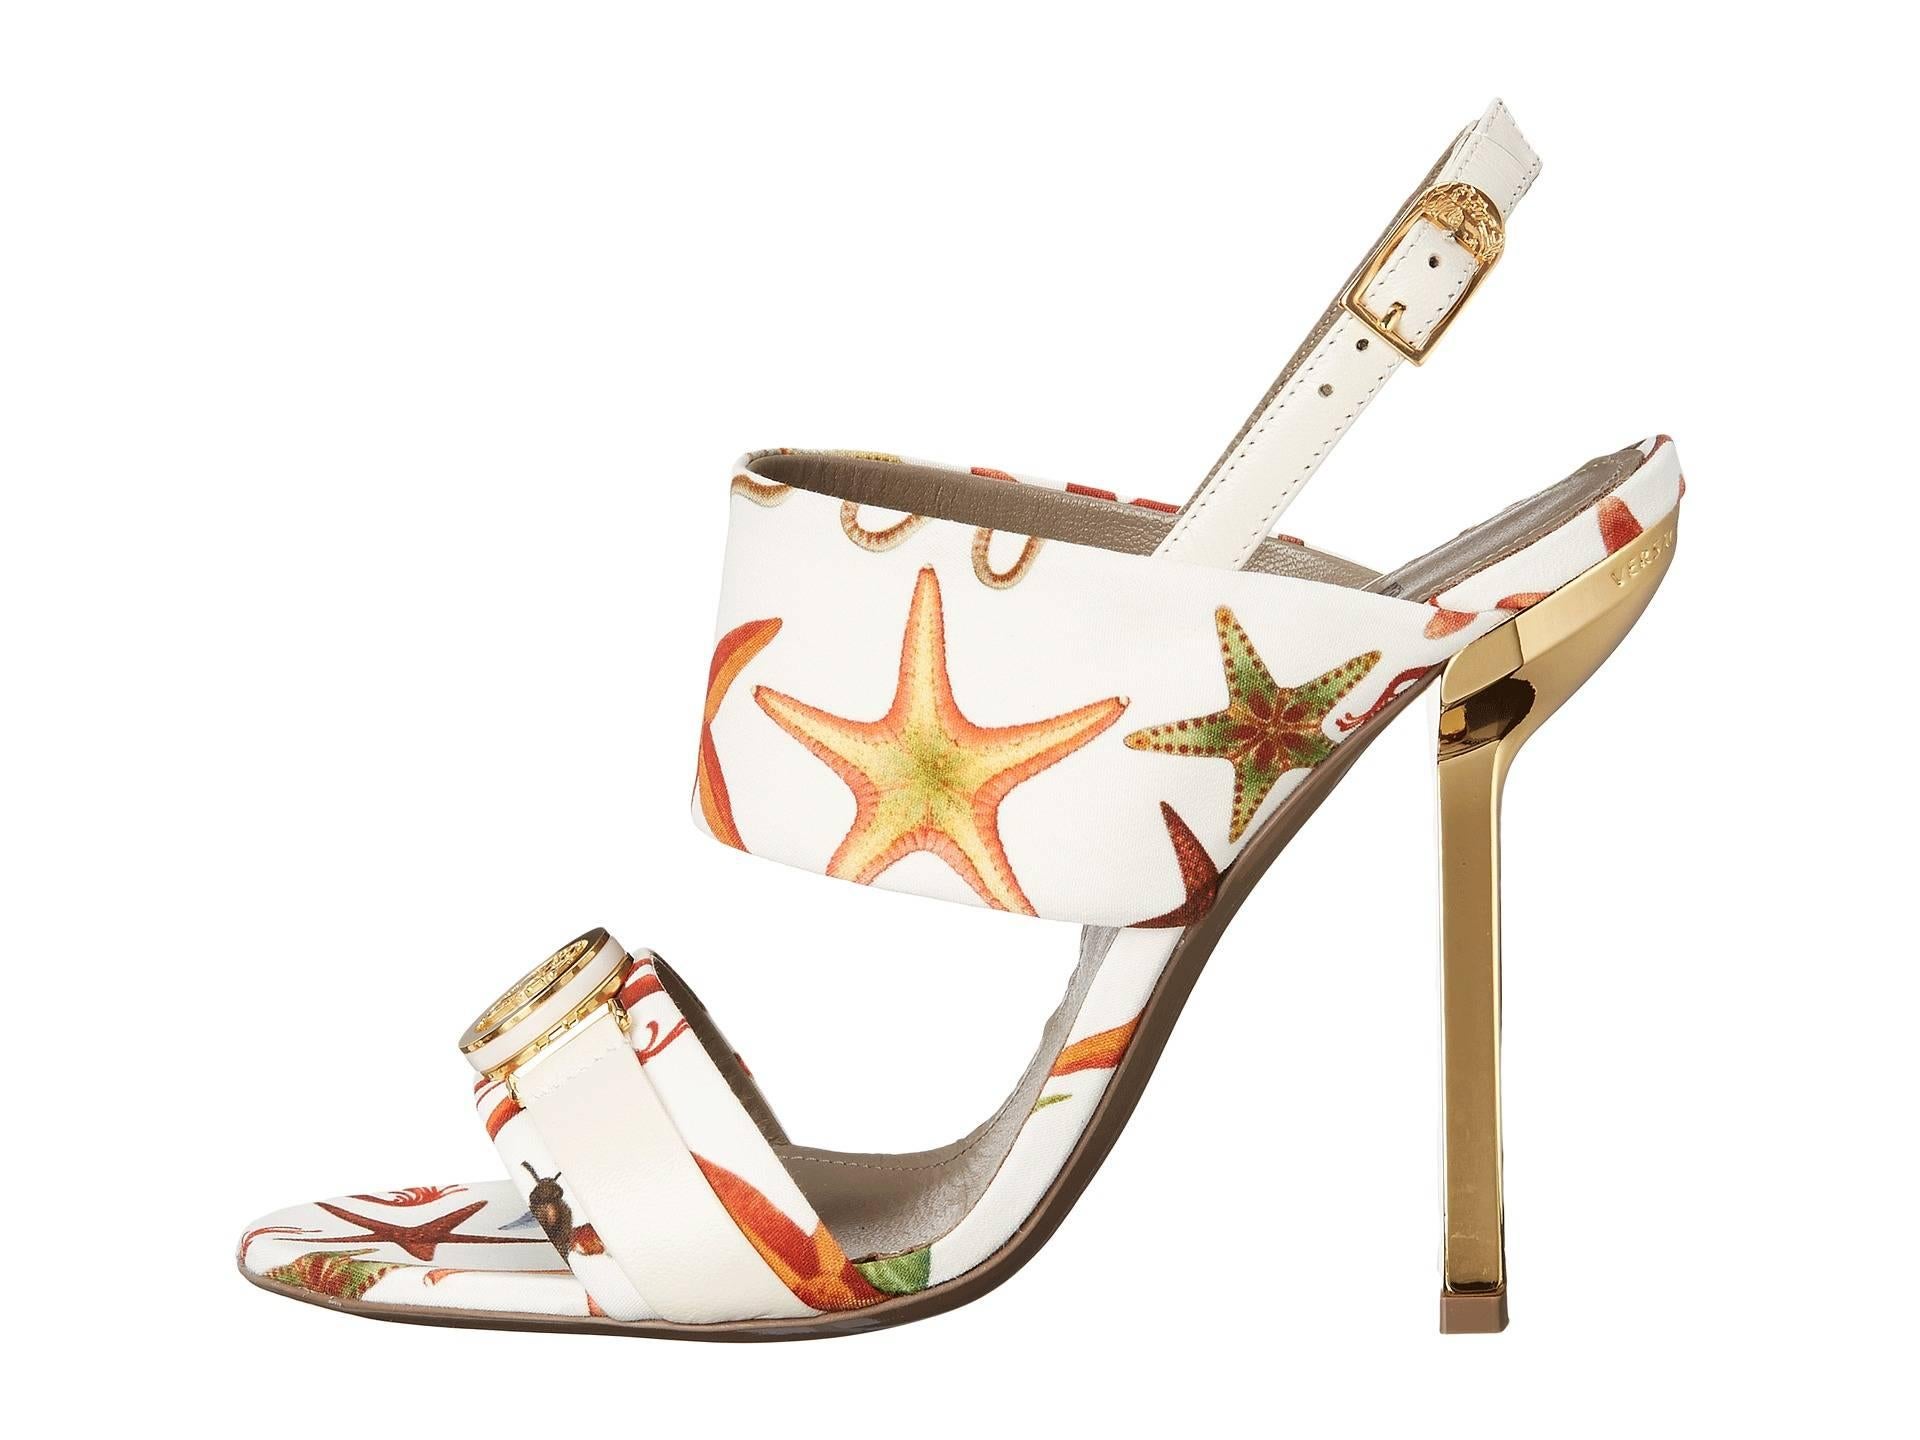 Be a gorgeous sea fairing maiden wearing the Versace Collection Oro Bizantino Printed Open Toe Heel.
Italian size 36 - US 6
Leather and textile upper.
Open toe silhouette.
Slip-on construction with adjustable ankle strap and buckle closure.
Leather